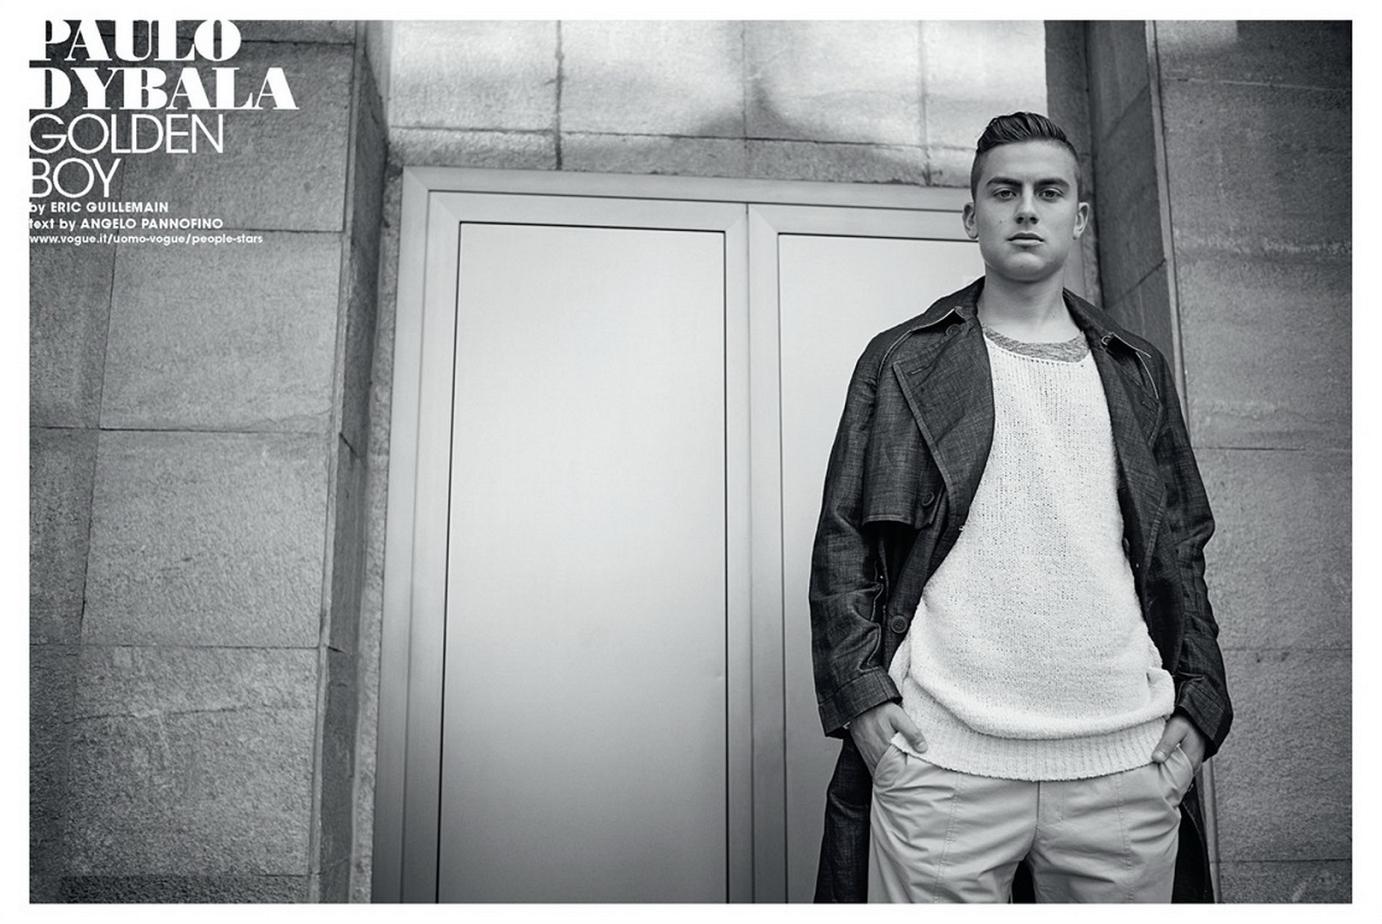 CoqCreative power by ProductionLink s.r.l. L-Uomo-Vogue-Paulo-Dybala L-Uomo-Vogue-Paulo-Dybala  L-Uomo-Vogue-Paulo-Dybala